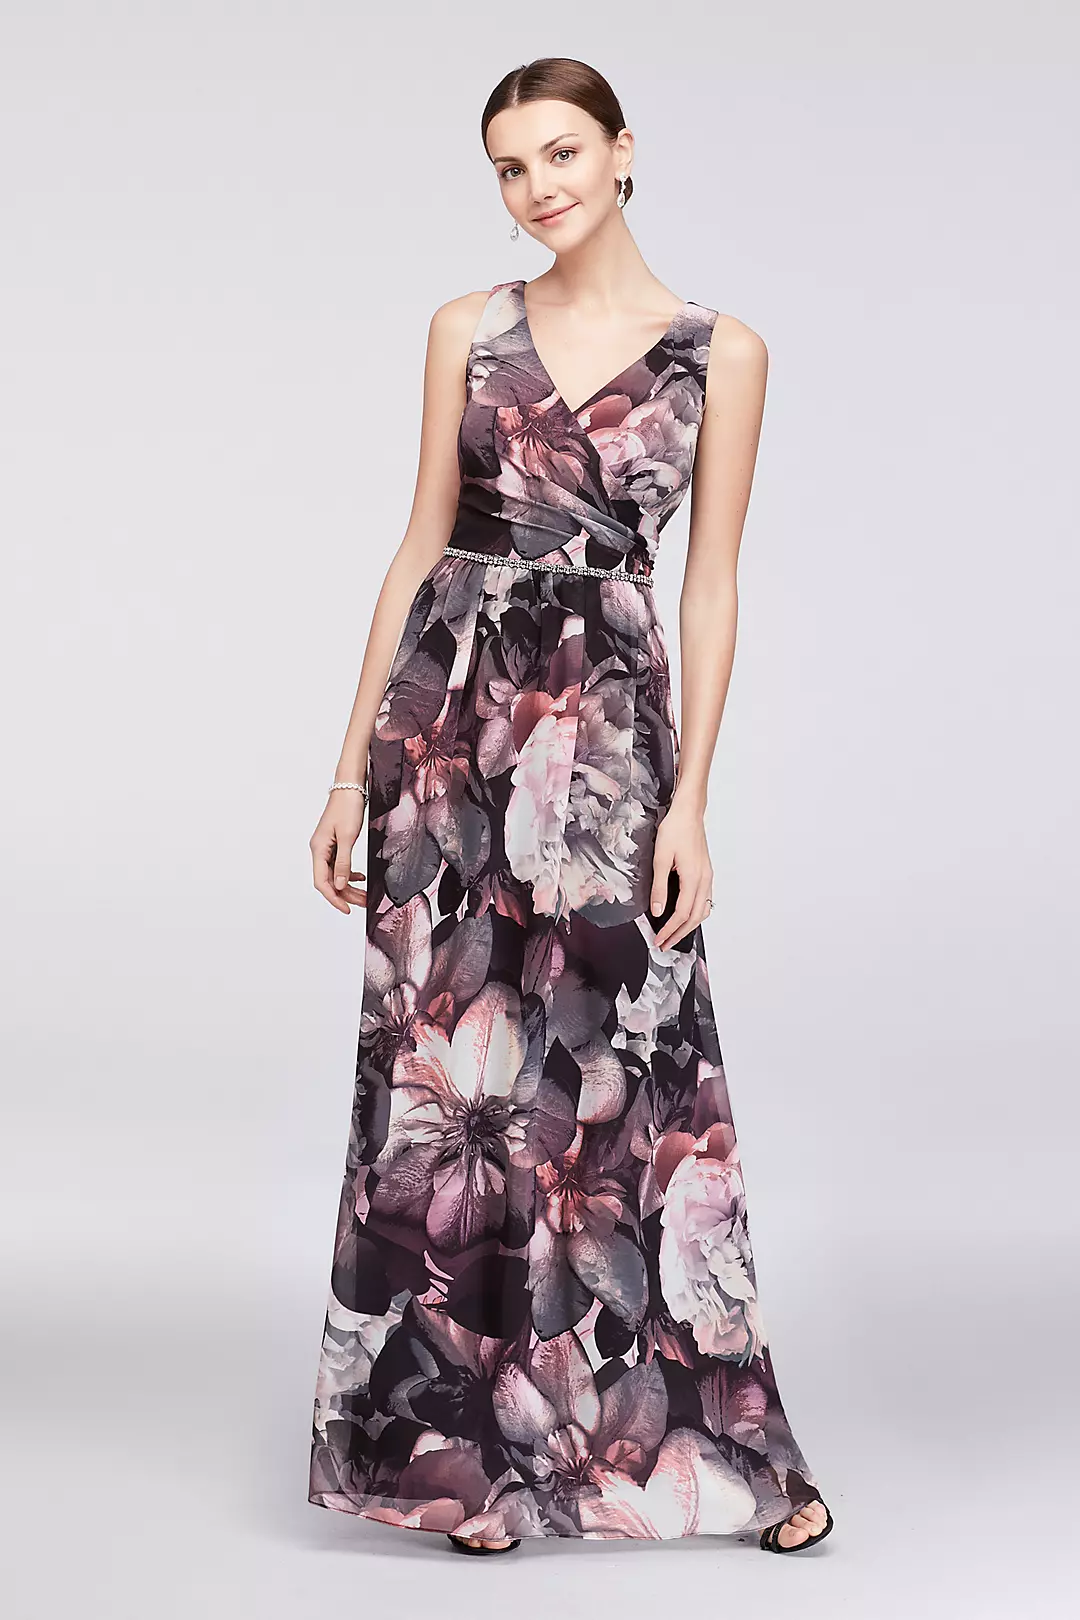 Floral Chiffon Surplice Gown with Beaded Waist Image